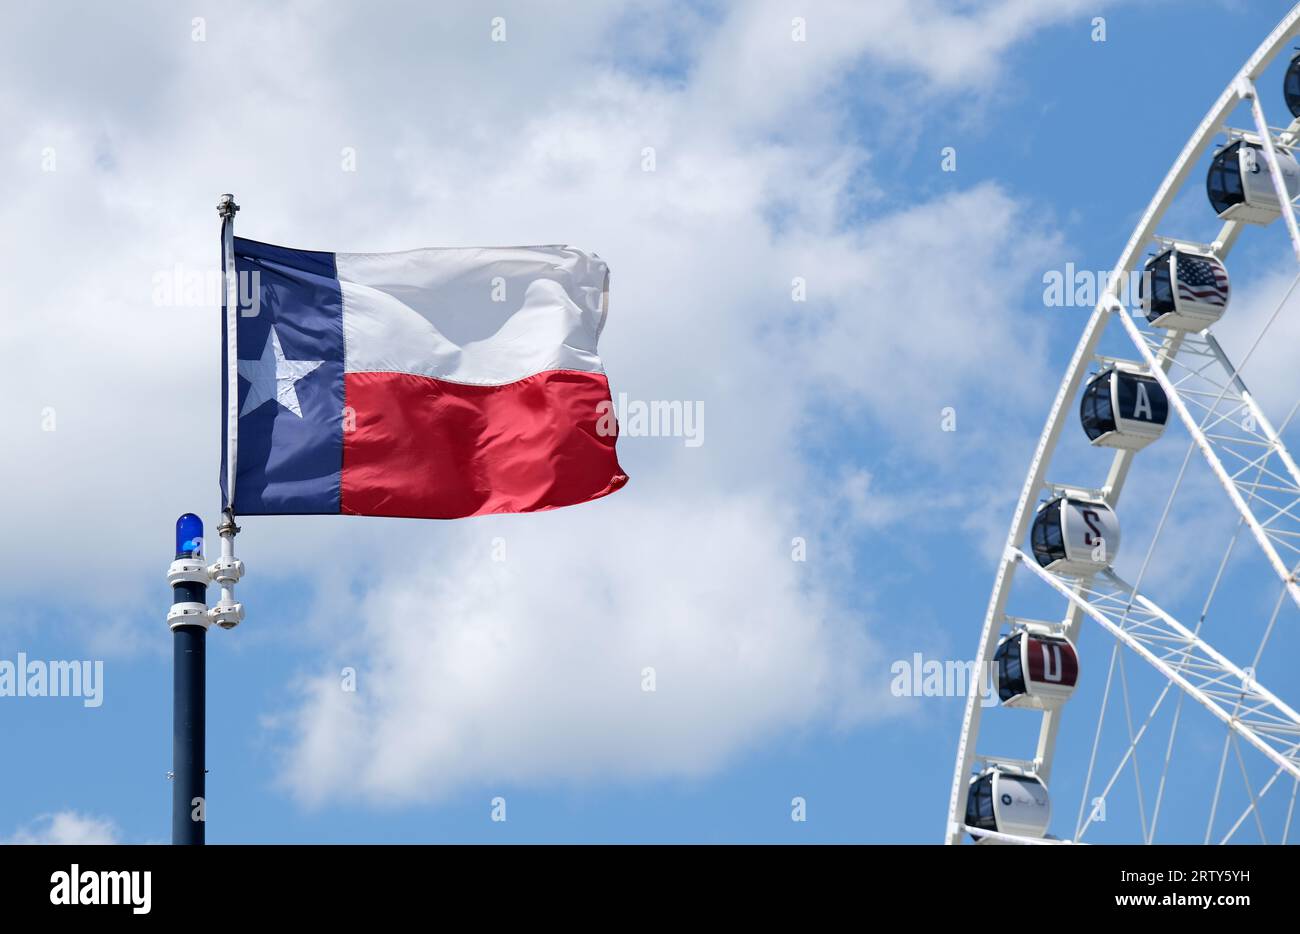 Texas state flag flying against a blue sky and white cloud background. Partial view of a Ferris wheel included. Stock Photo